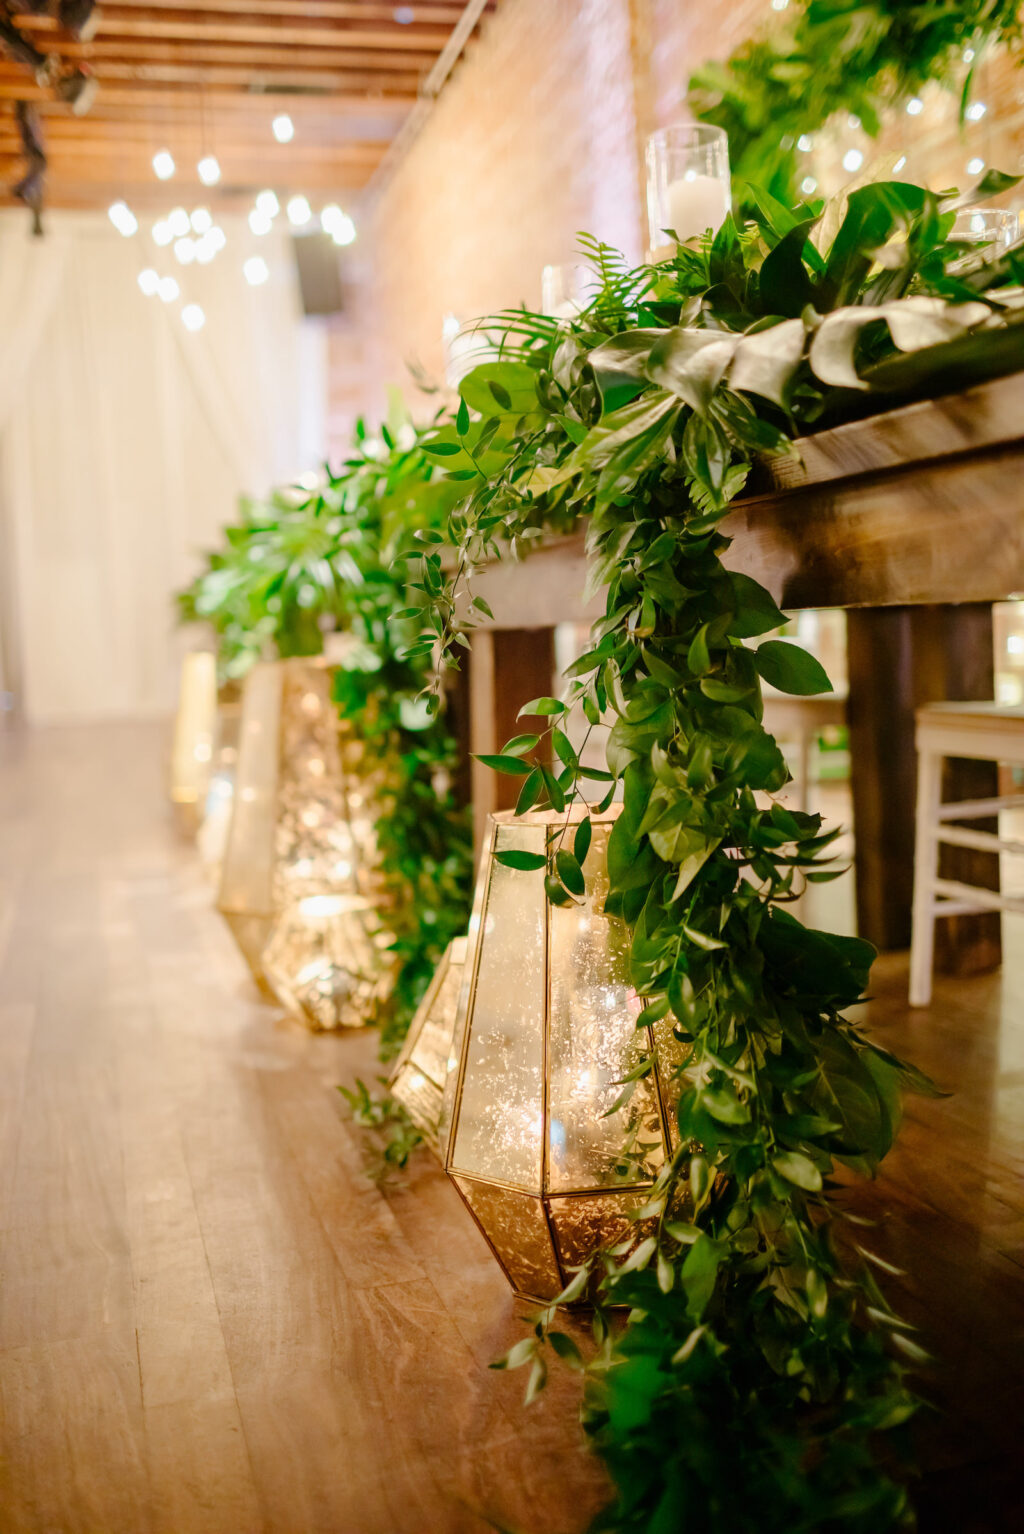 Elegant Wedding Reception and Decor, Exposed Brick with Vintage String lighting, Tropical Inspired Greenery and Floral Arrangements on Long Wooden Feasting Table with Large Square Arch Backdrop | Geometric Mercury Gold Vases | Historic Florida Wedding Venue NOVA 535